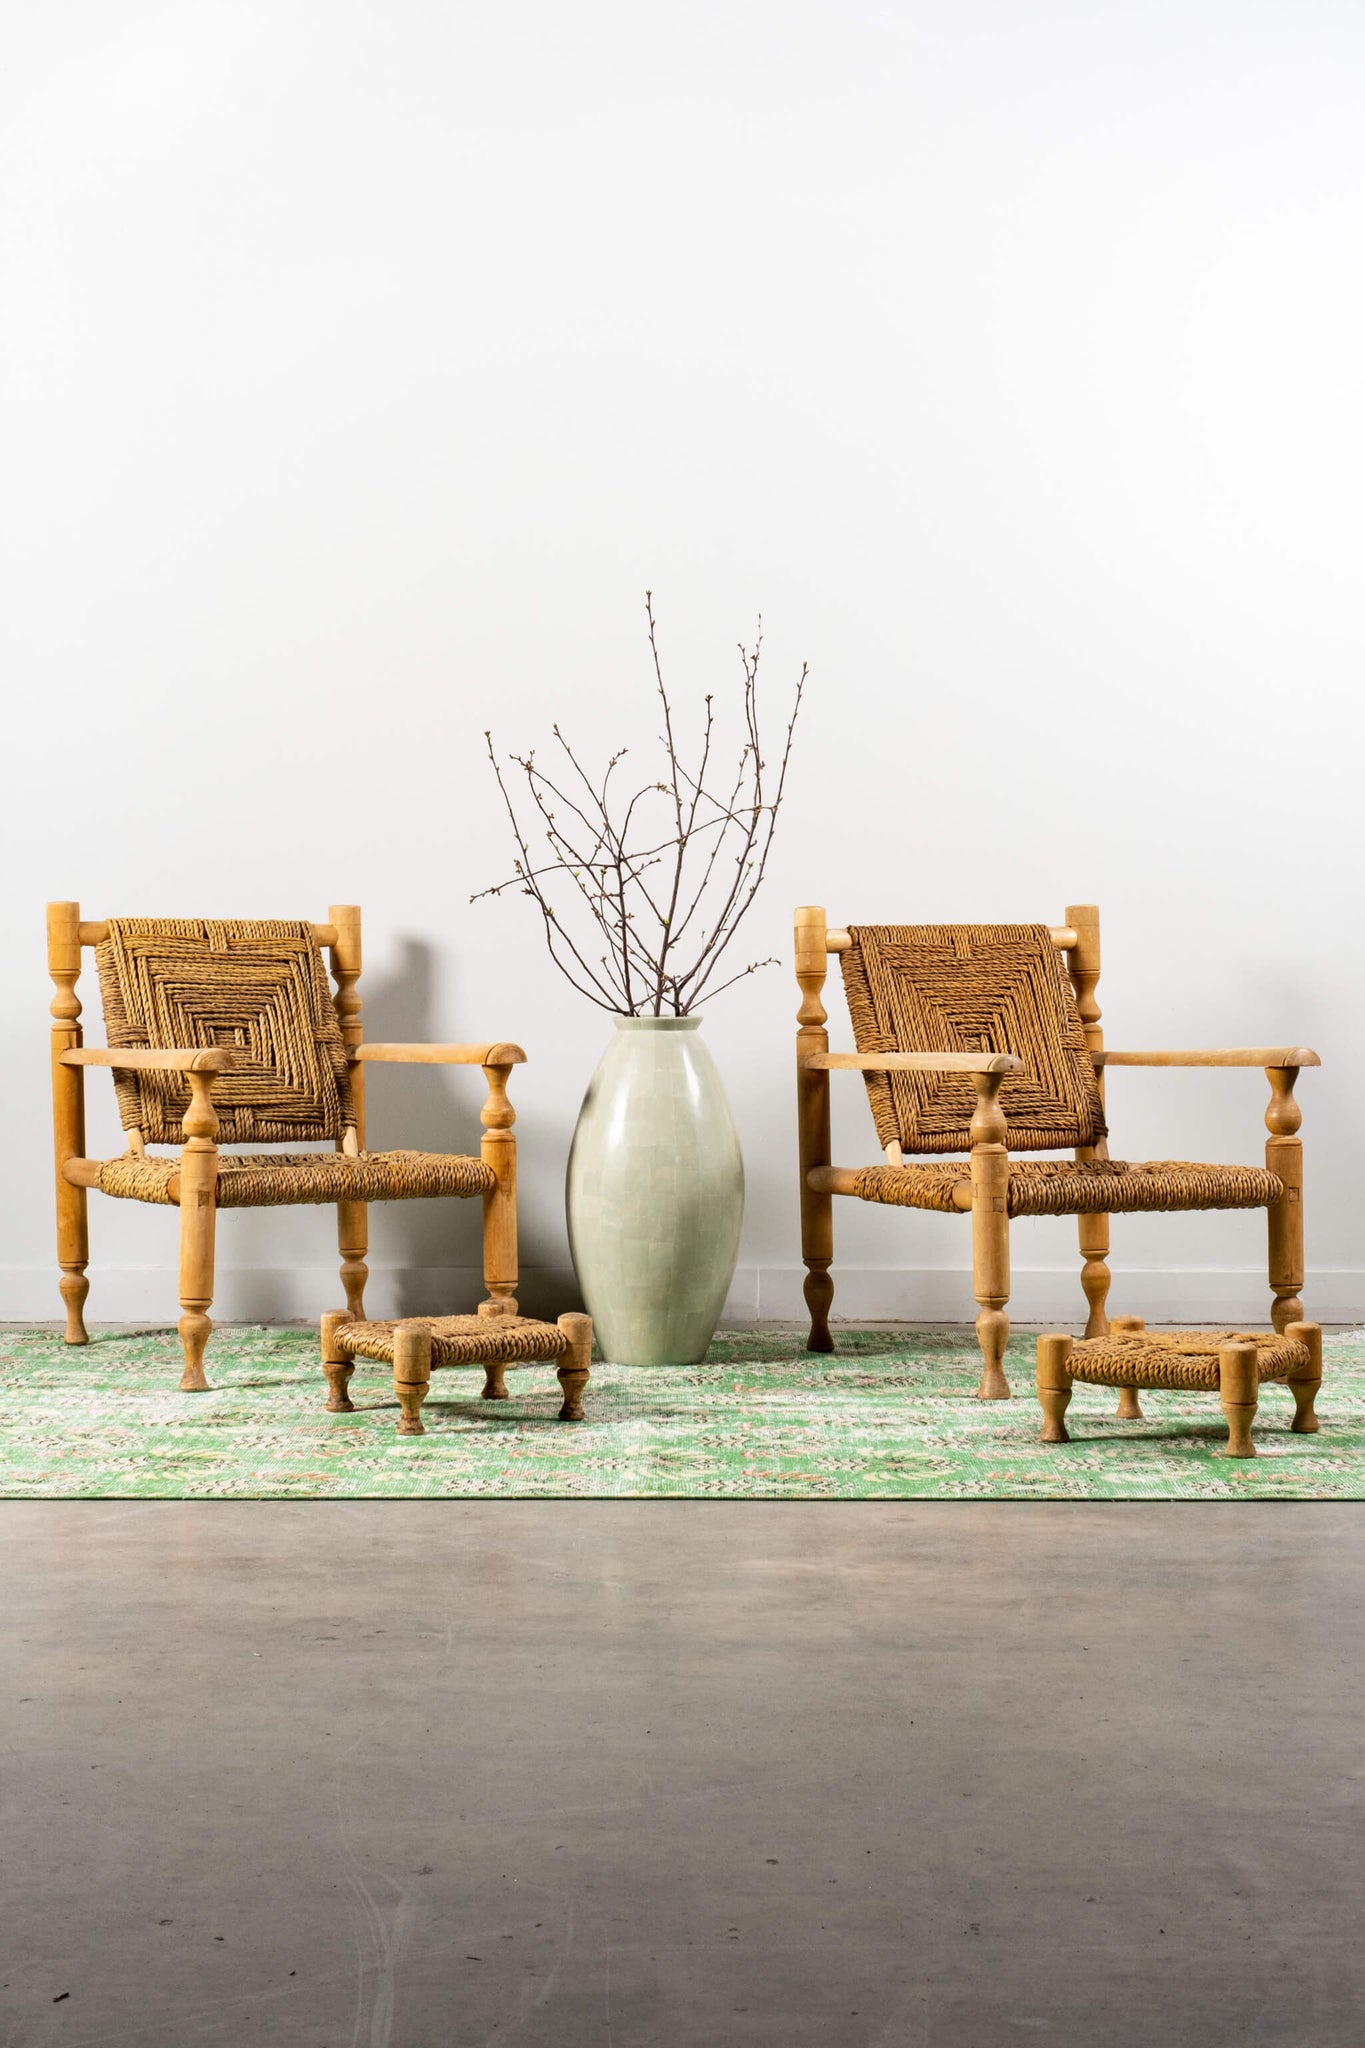 Vintage French Wood and Rope Armchairs with Footstools Adrien Audoux and Frida Minet, shown side by side on rug with floor vase